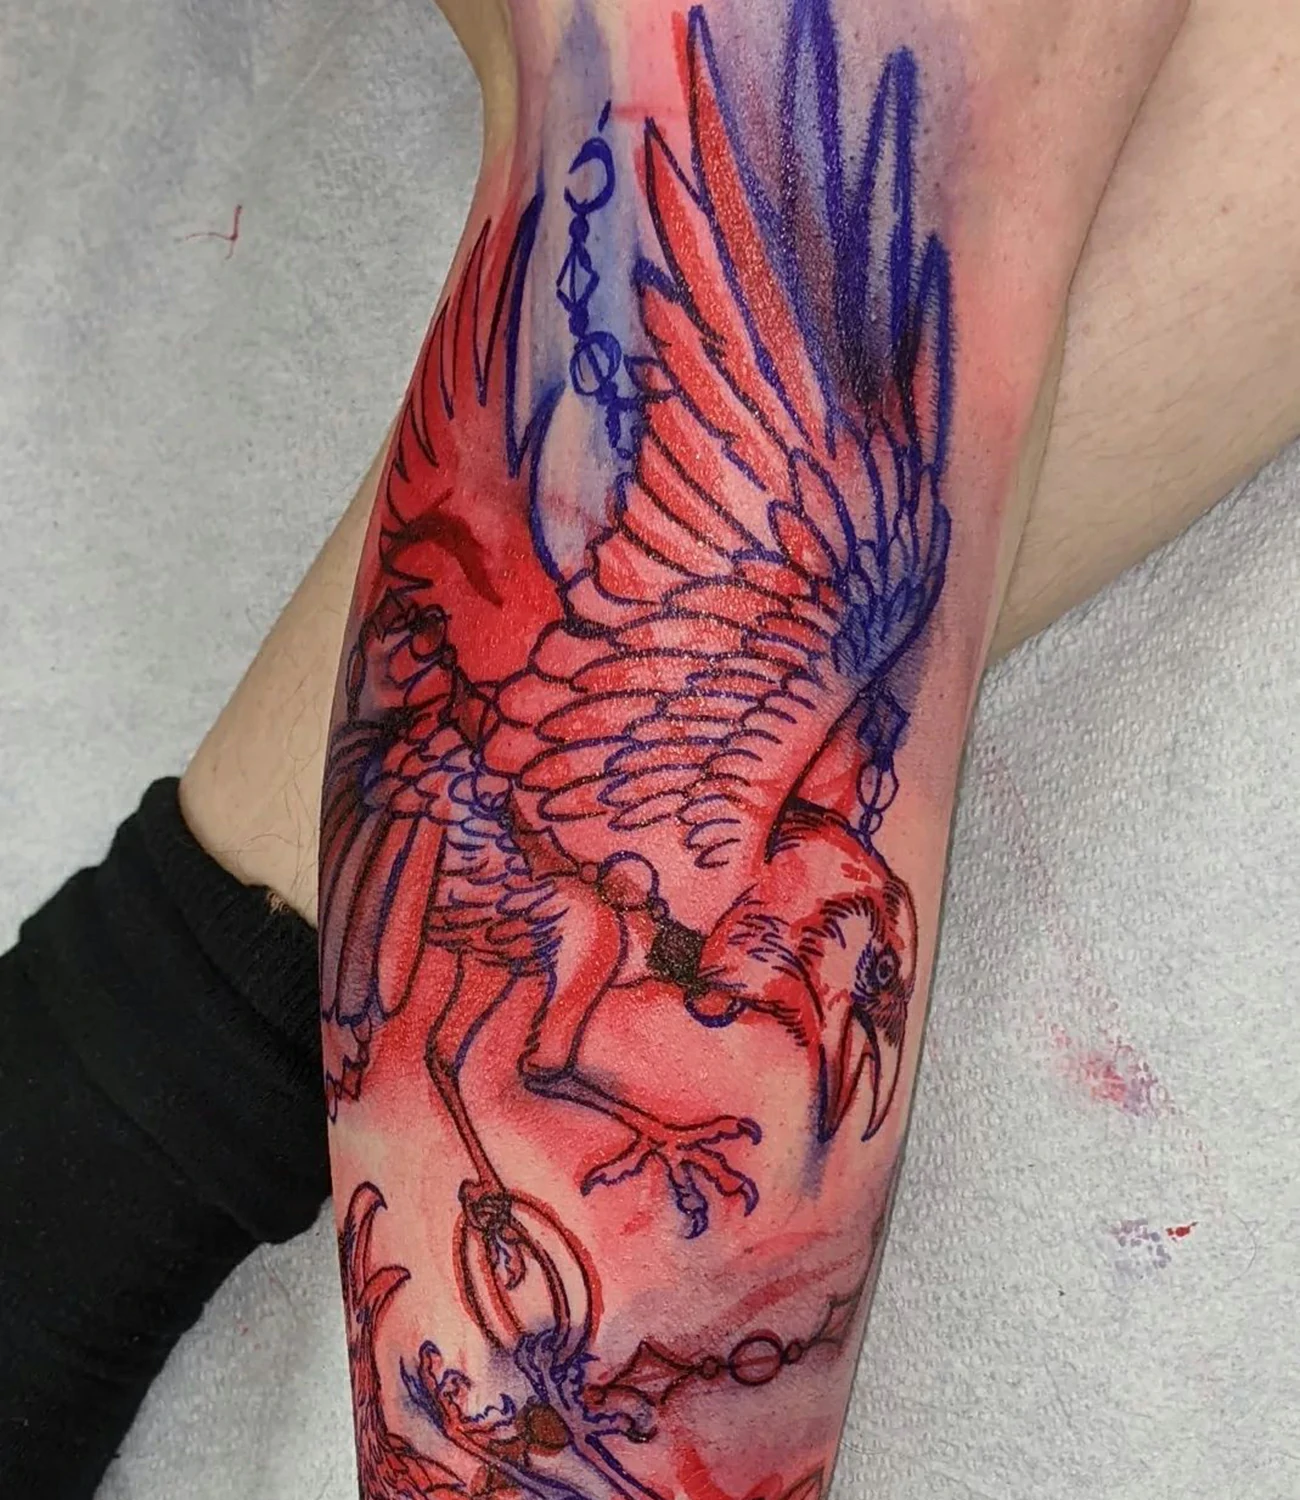 Red raven tattoo: A unique take with a raven tattoo done in red ink.